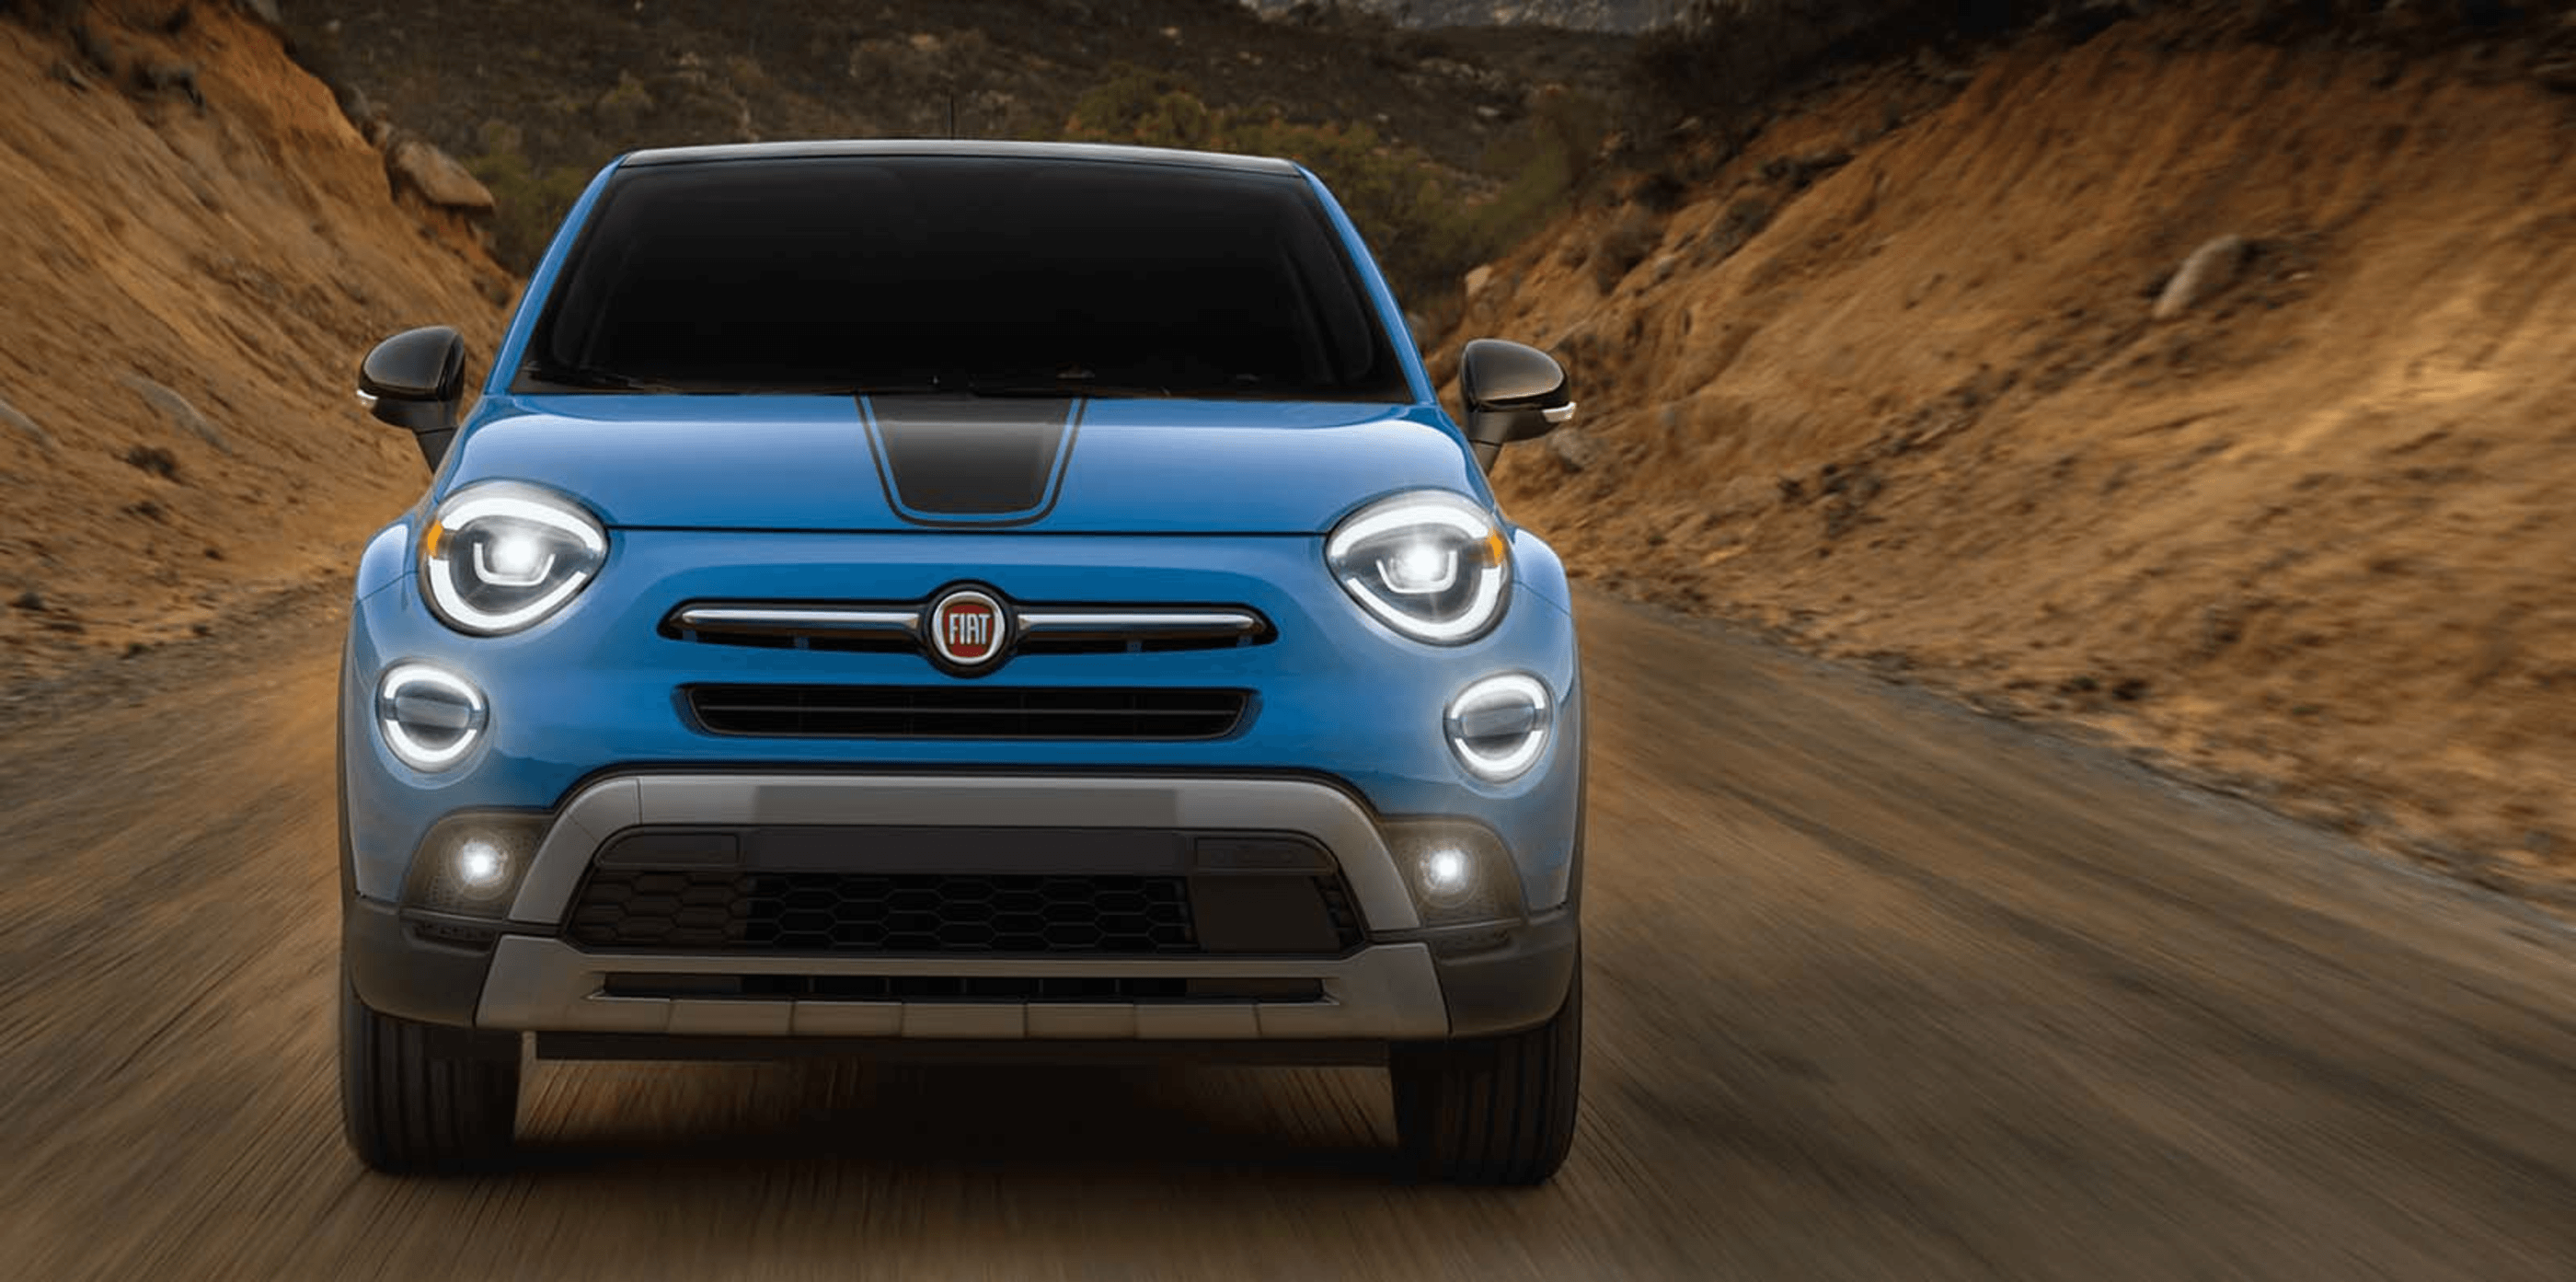 The front of a blue Fiat 500X driving on a dirt road.